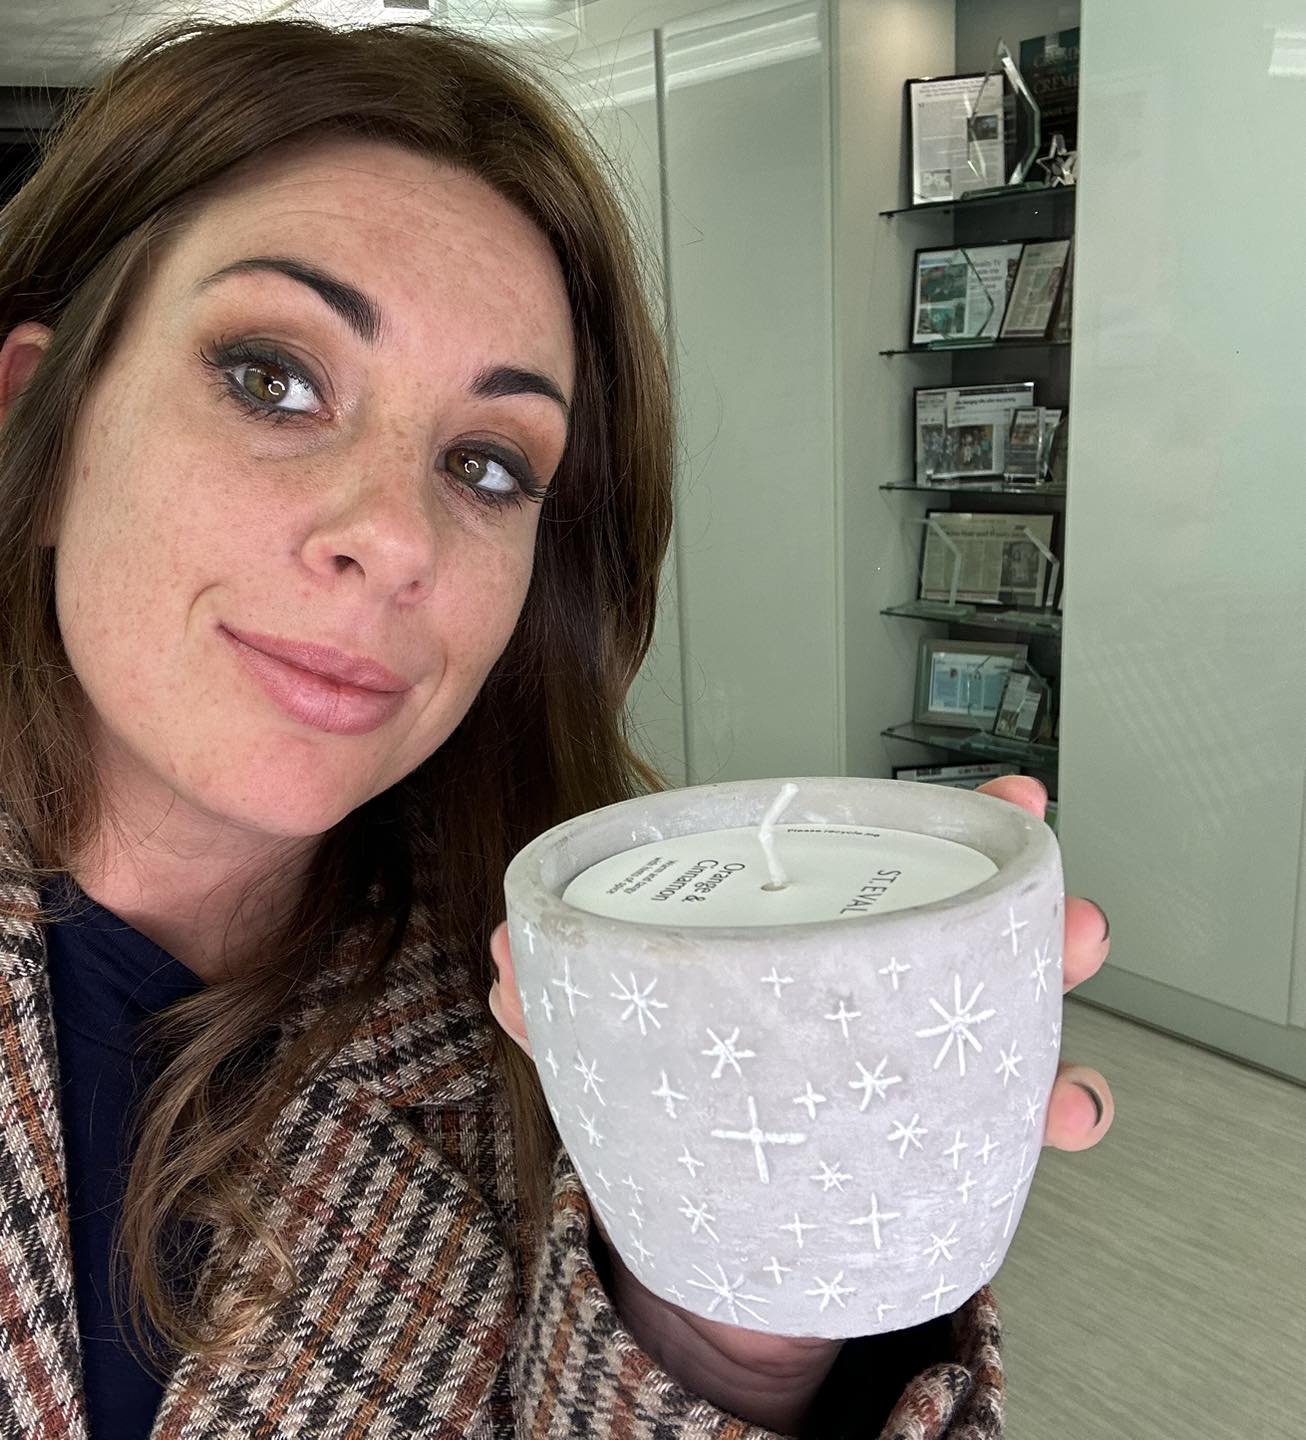 Gemma's candle gift to Katy